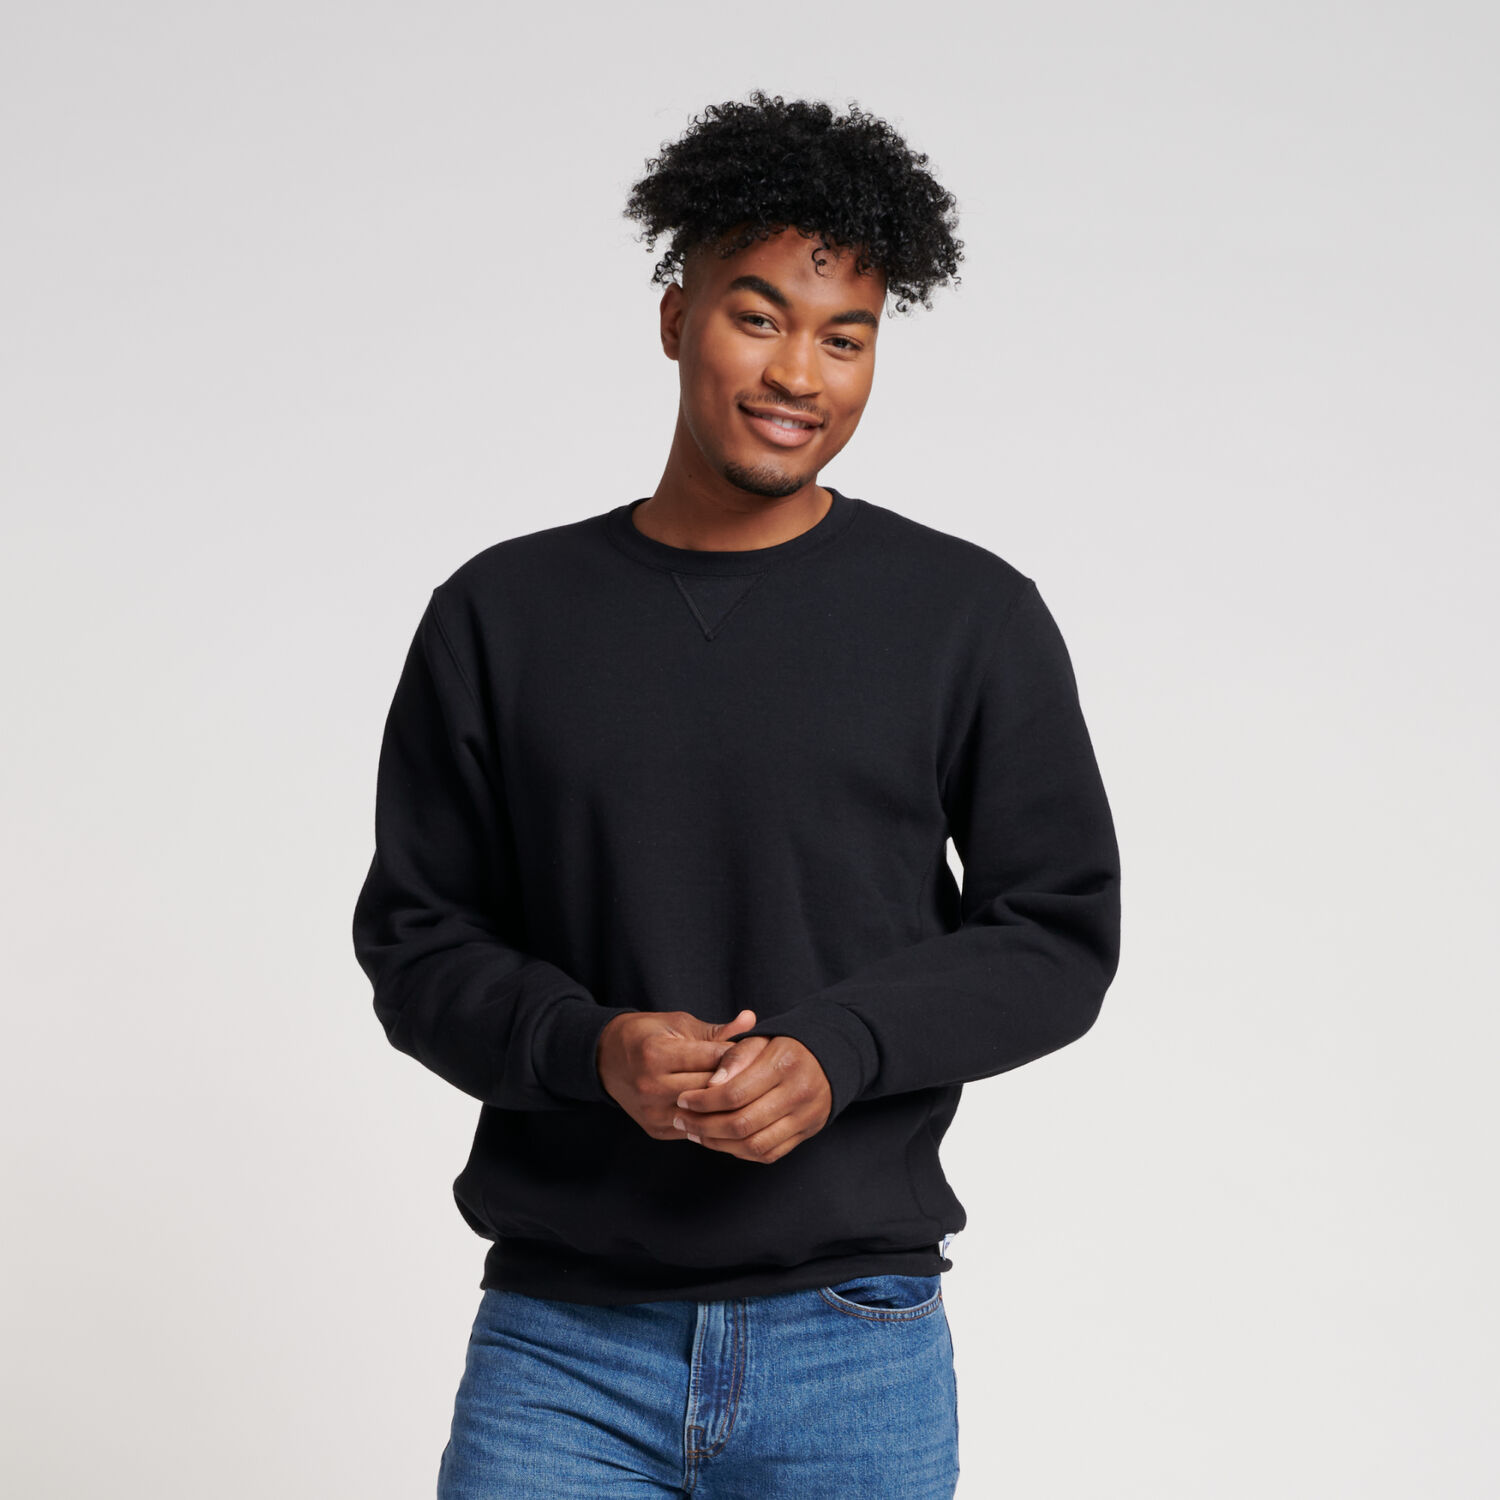 Black Crew-neck Sweater with Black Sweatpants Outfits For Men (12 ideas &  outfits)